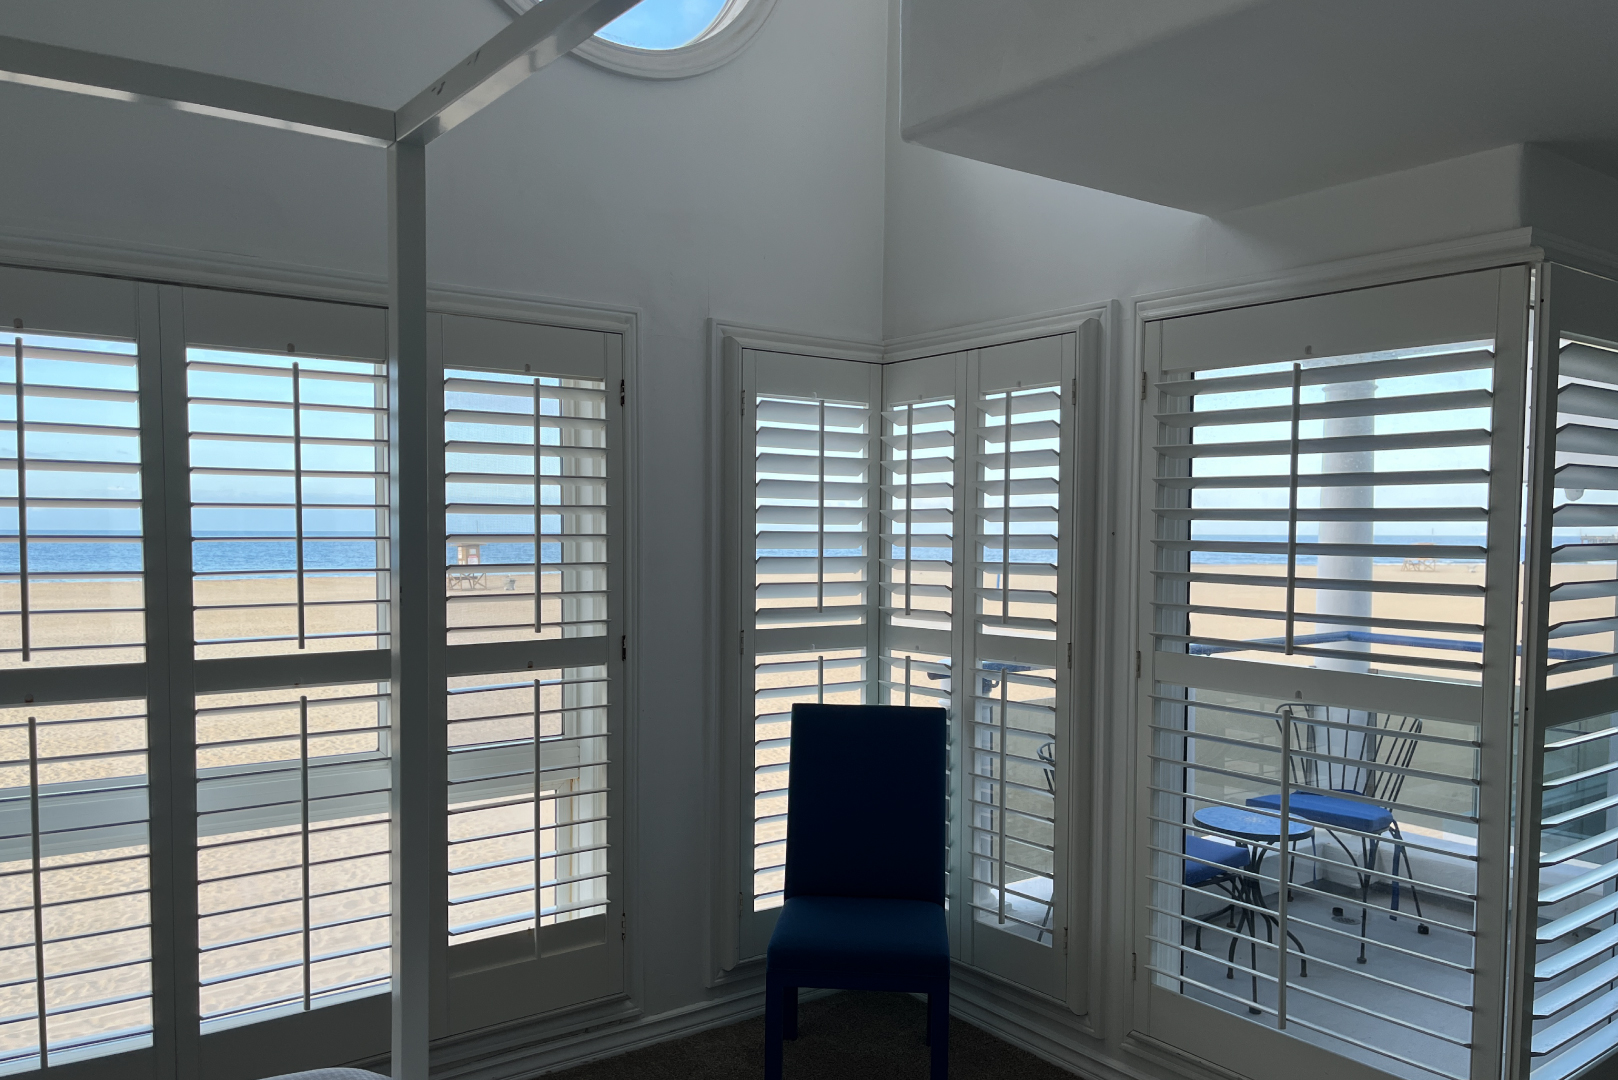 A view of the primary bedroom with ocean view